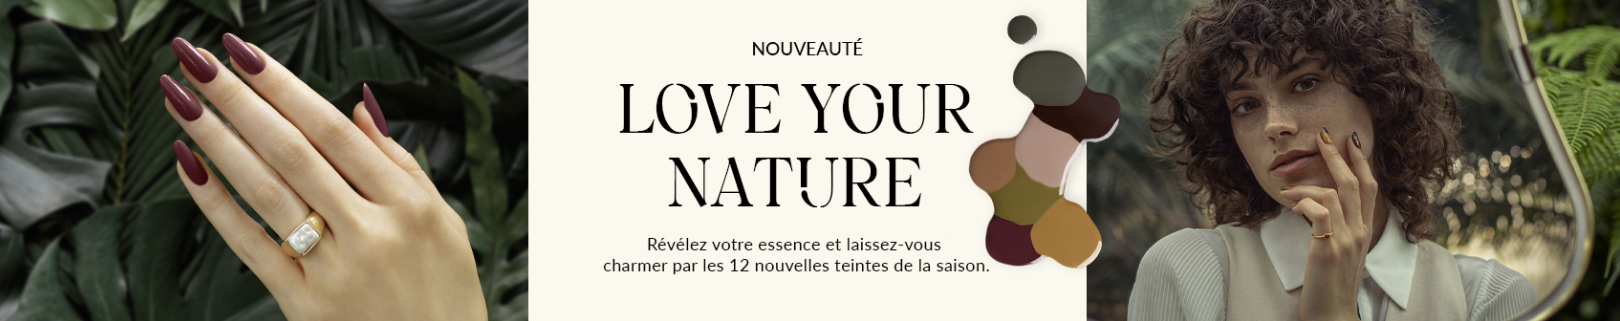 LOVE YOUR NATURE